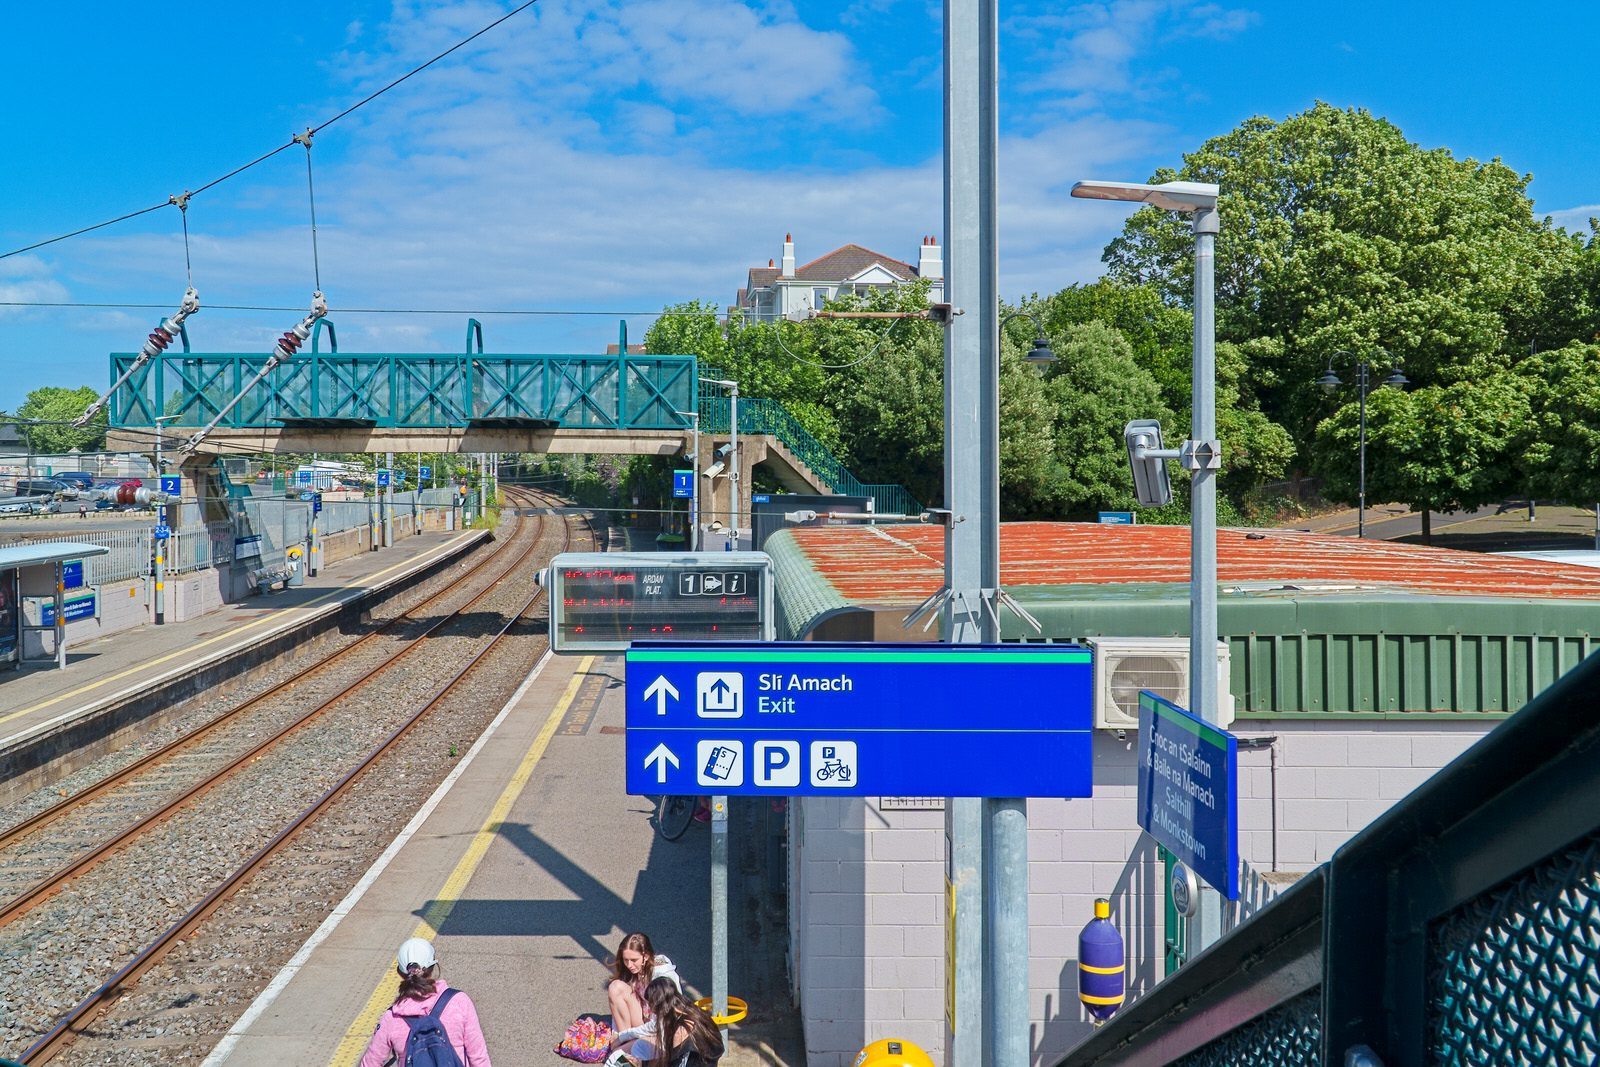 LONGFORD TERRACE AND CLOSE BY [SALTHILL AND MONKSTOWN TRAIN STATION] 016